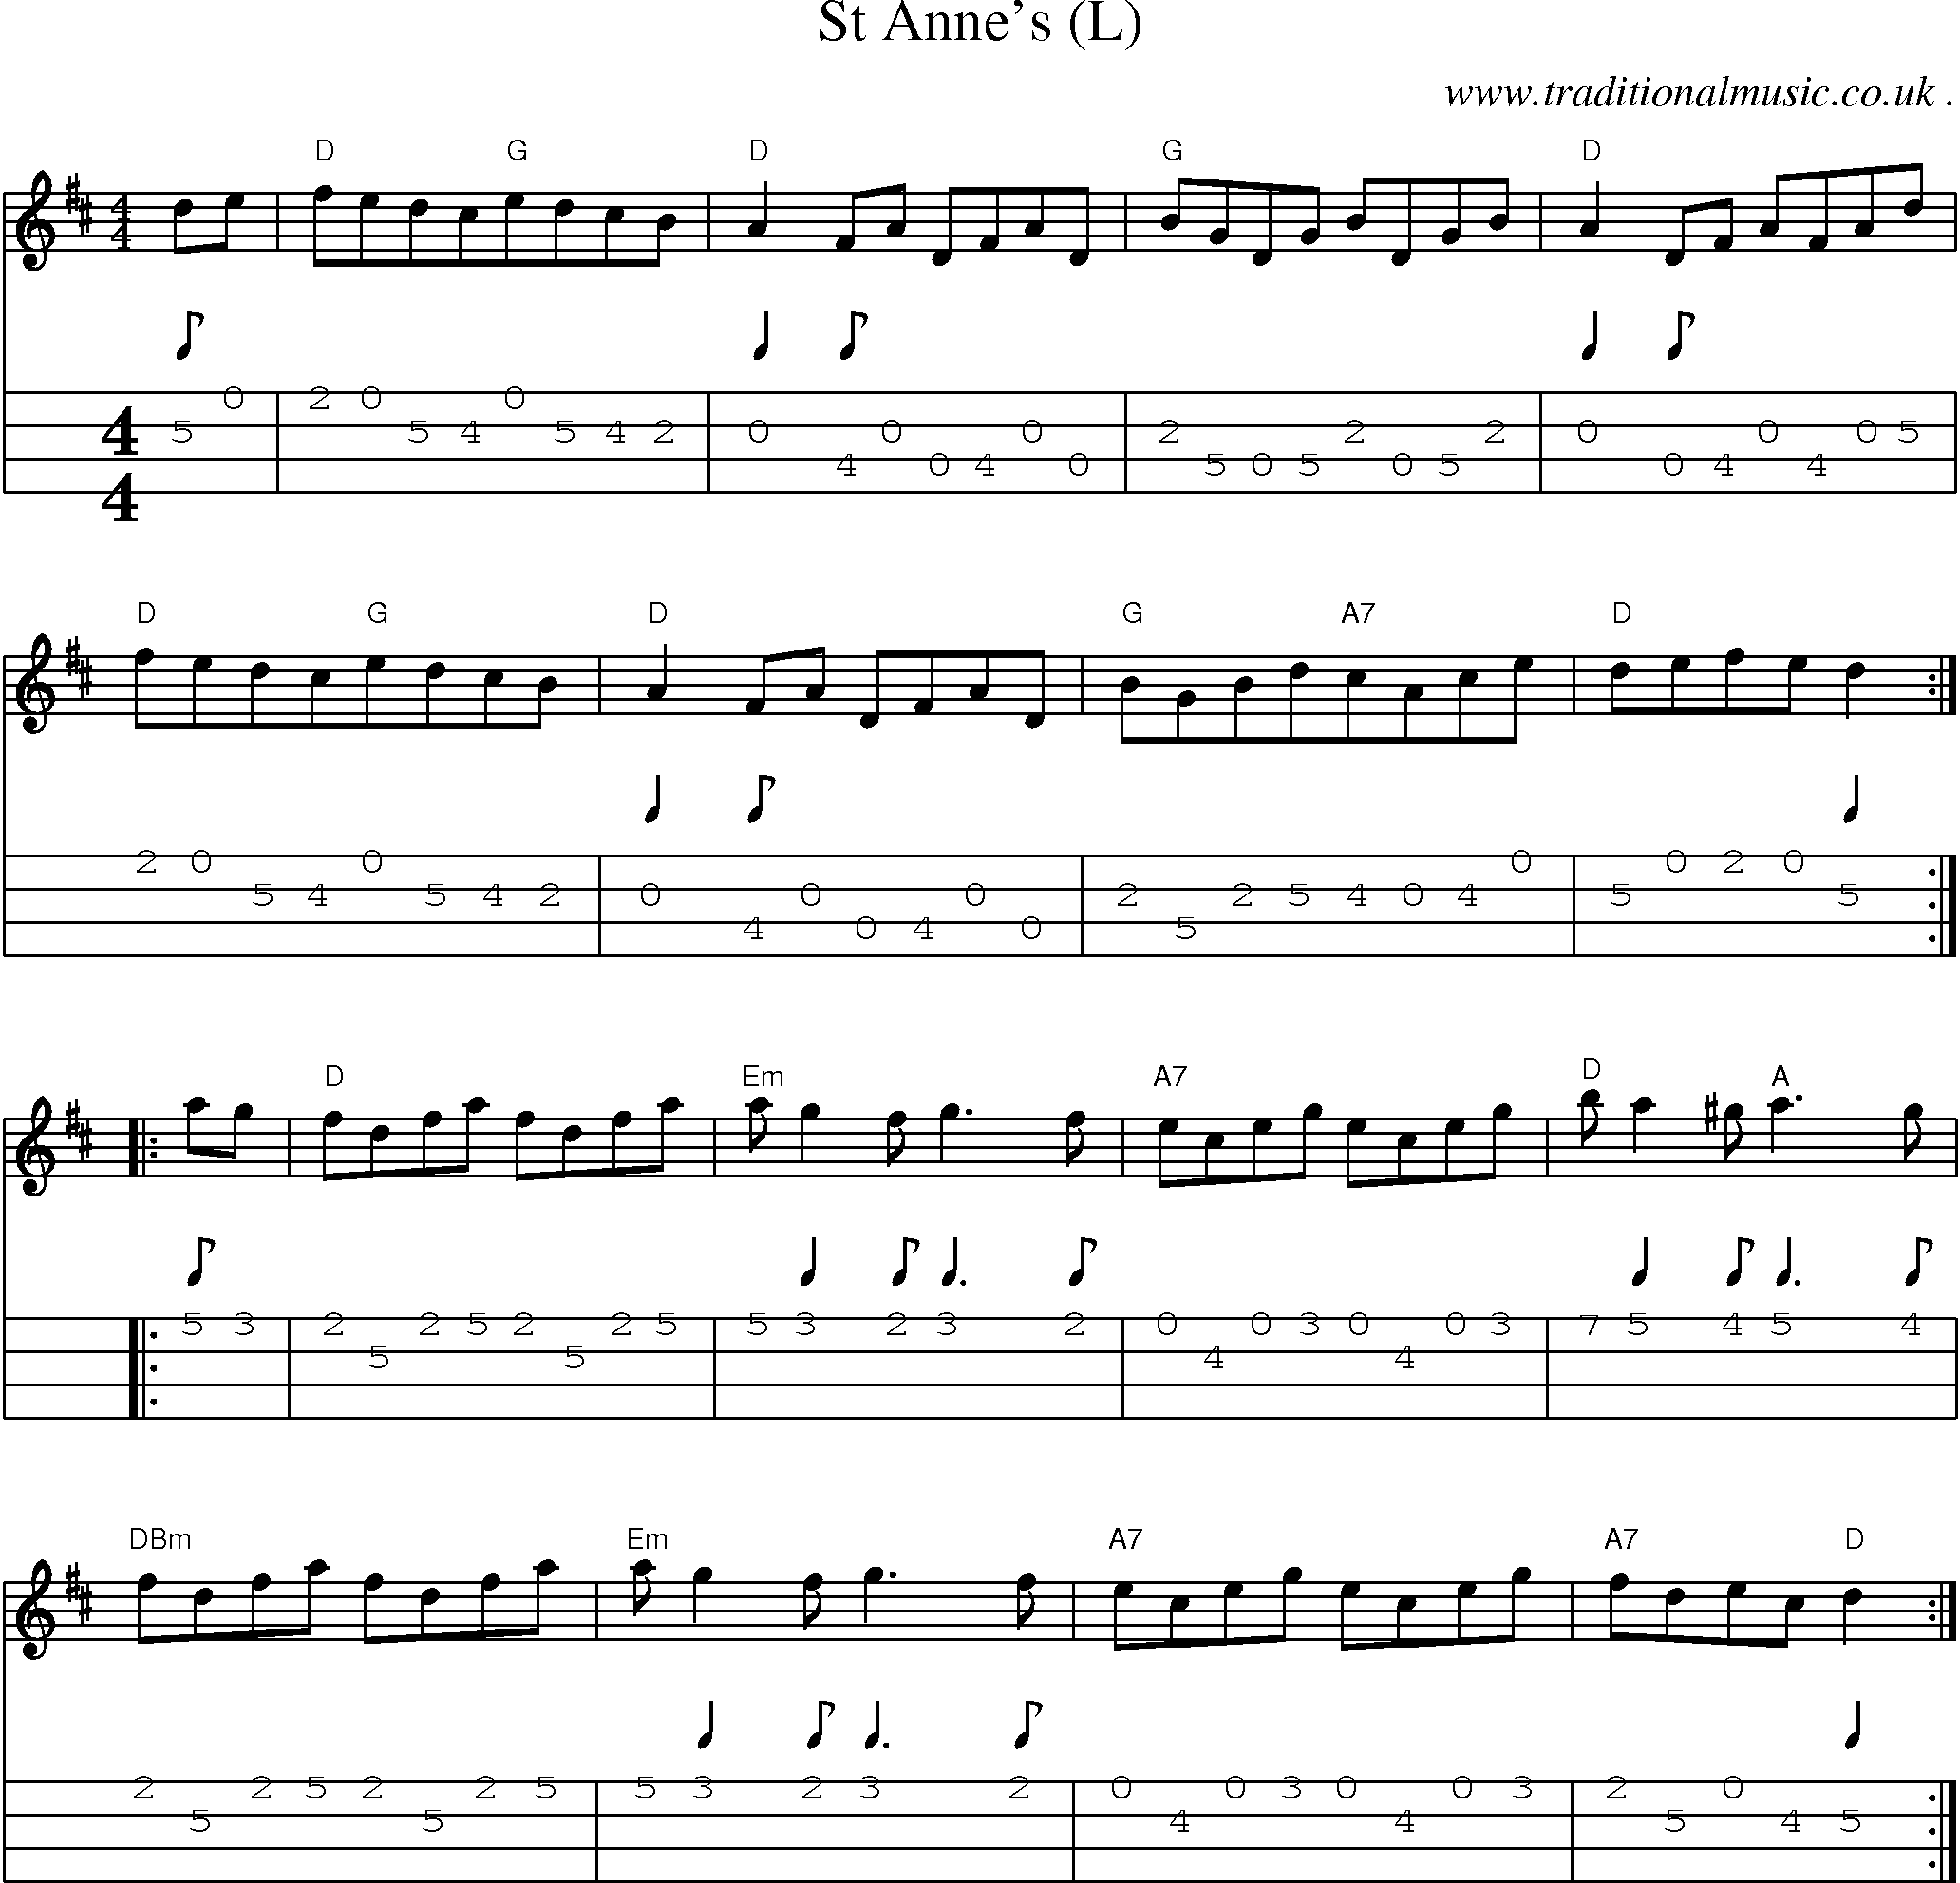 Sheet-Music and Mandolin Tabs for St Annes (l)